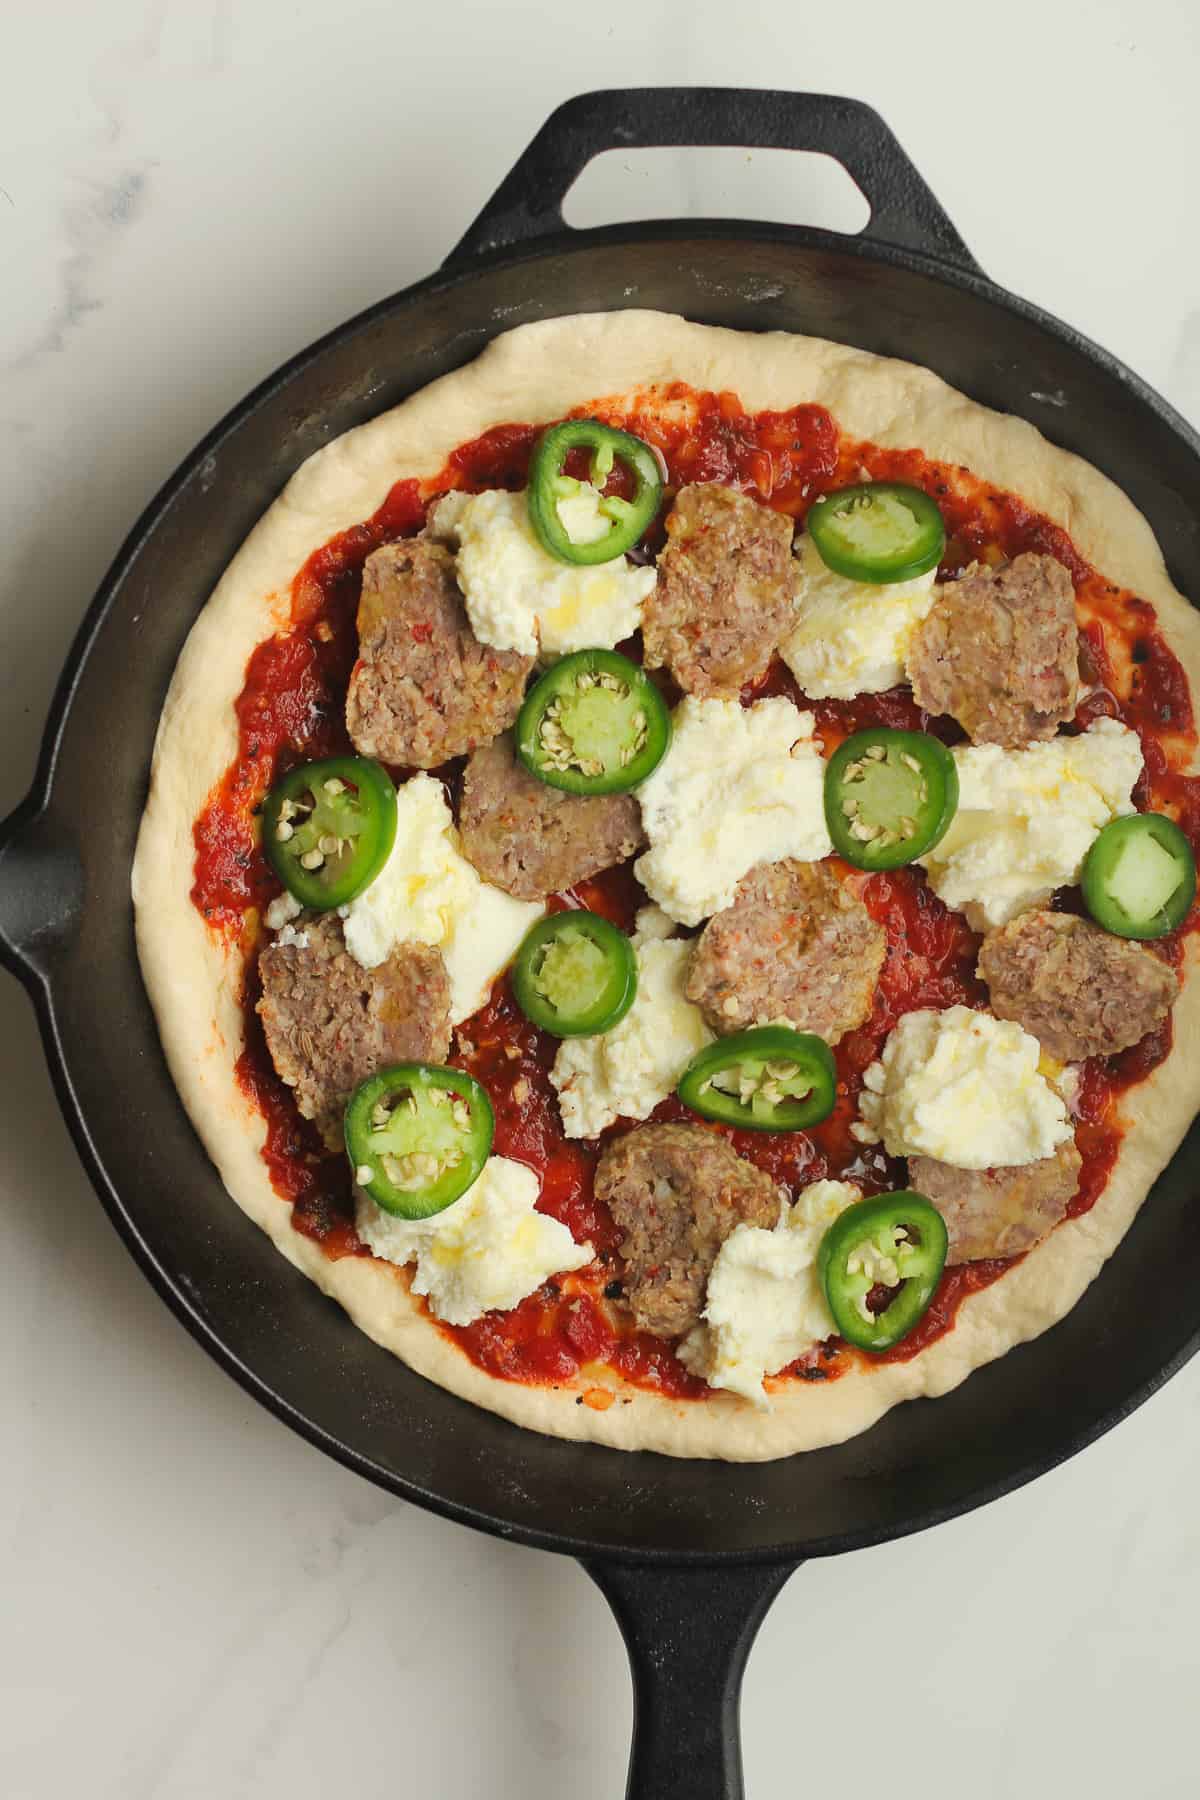 Unbaked pizza in skillet.